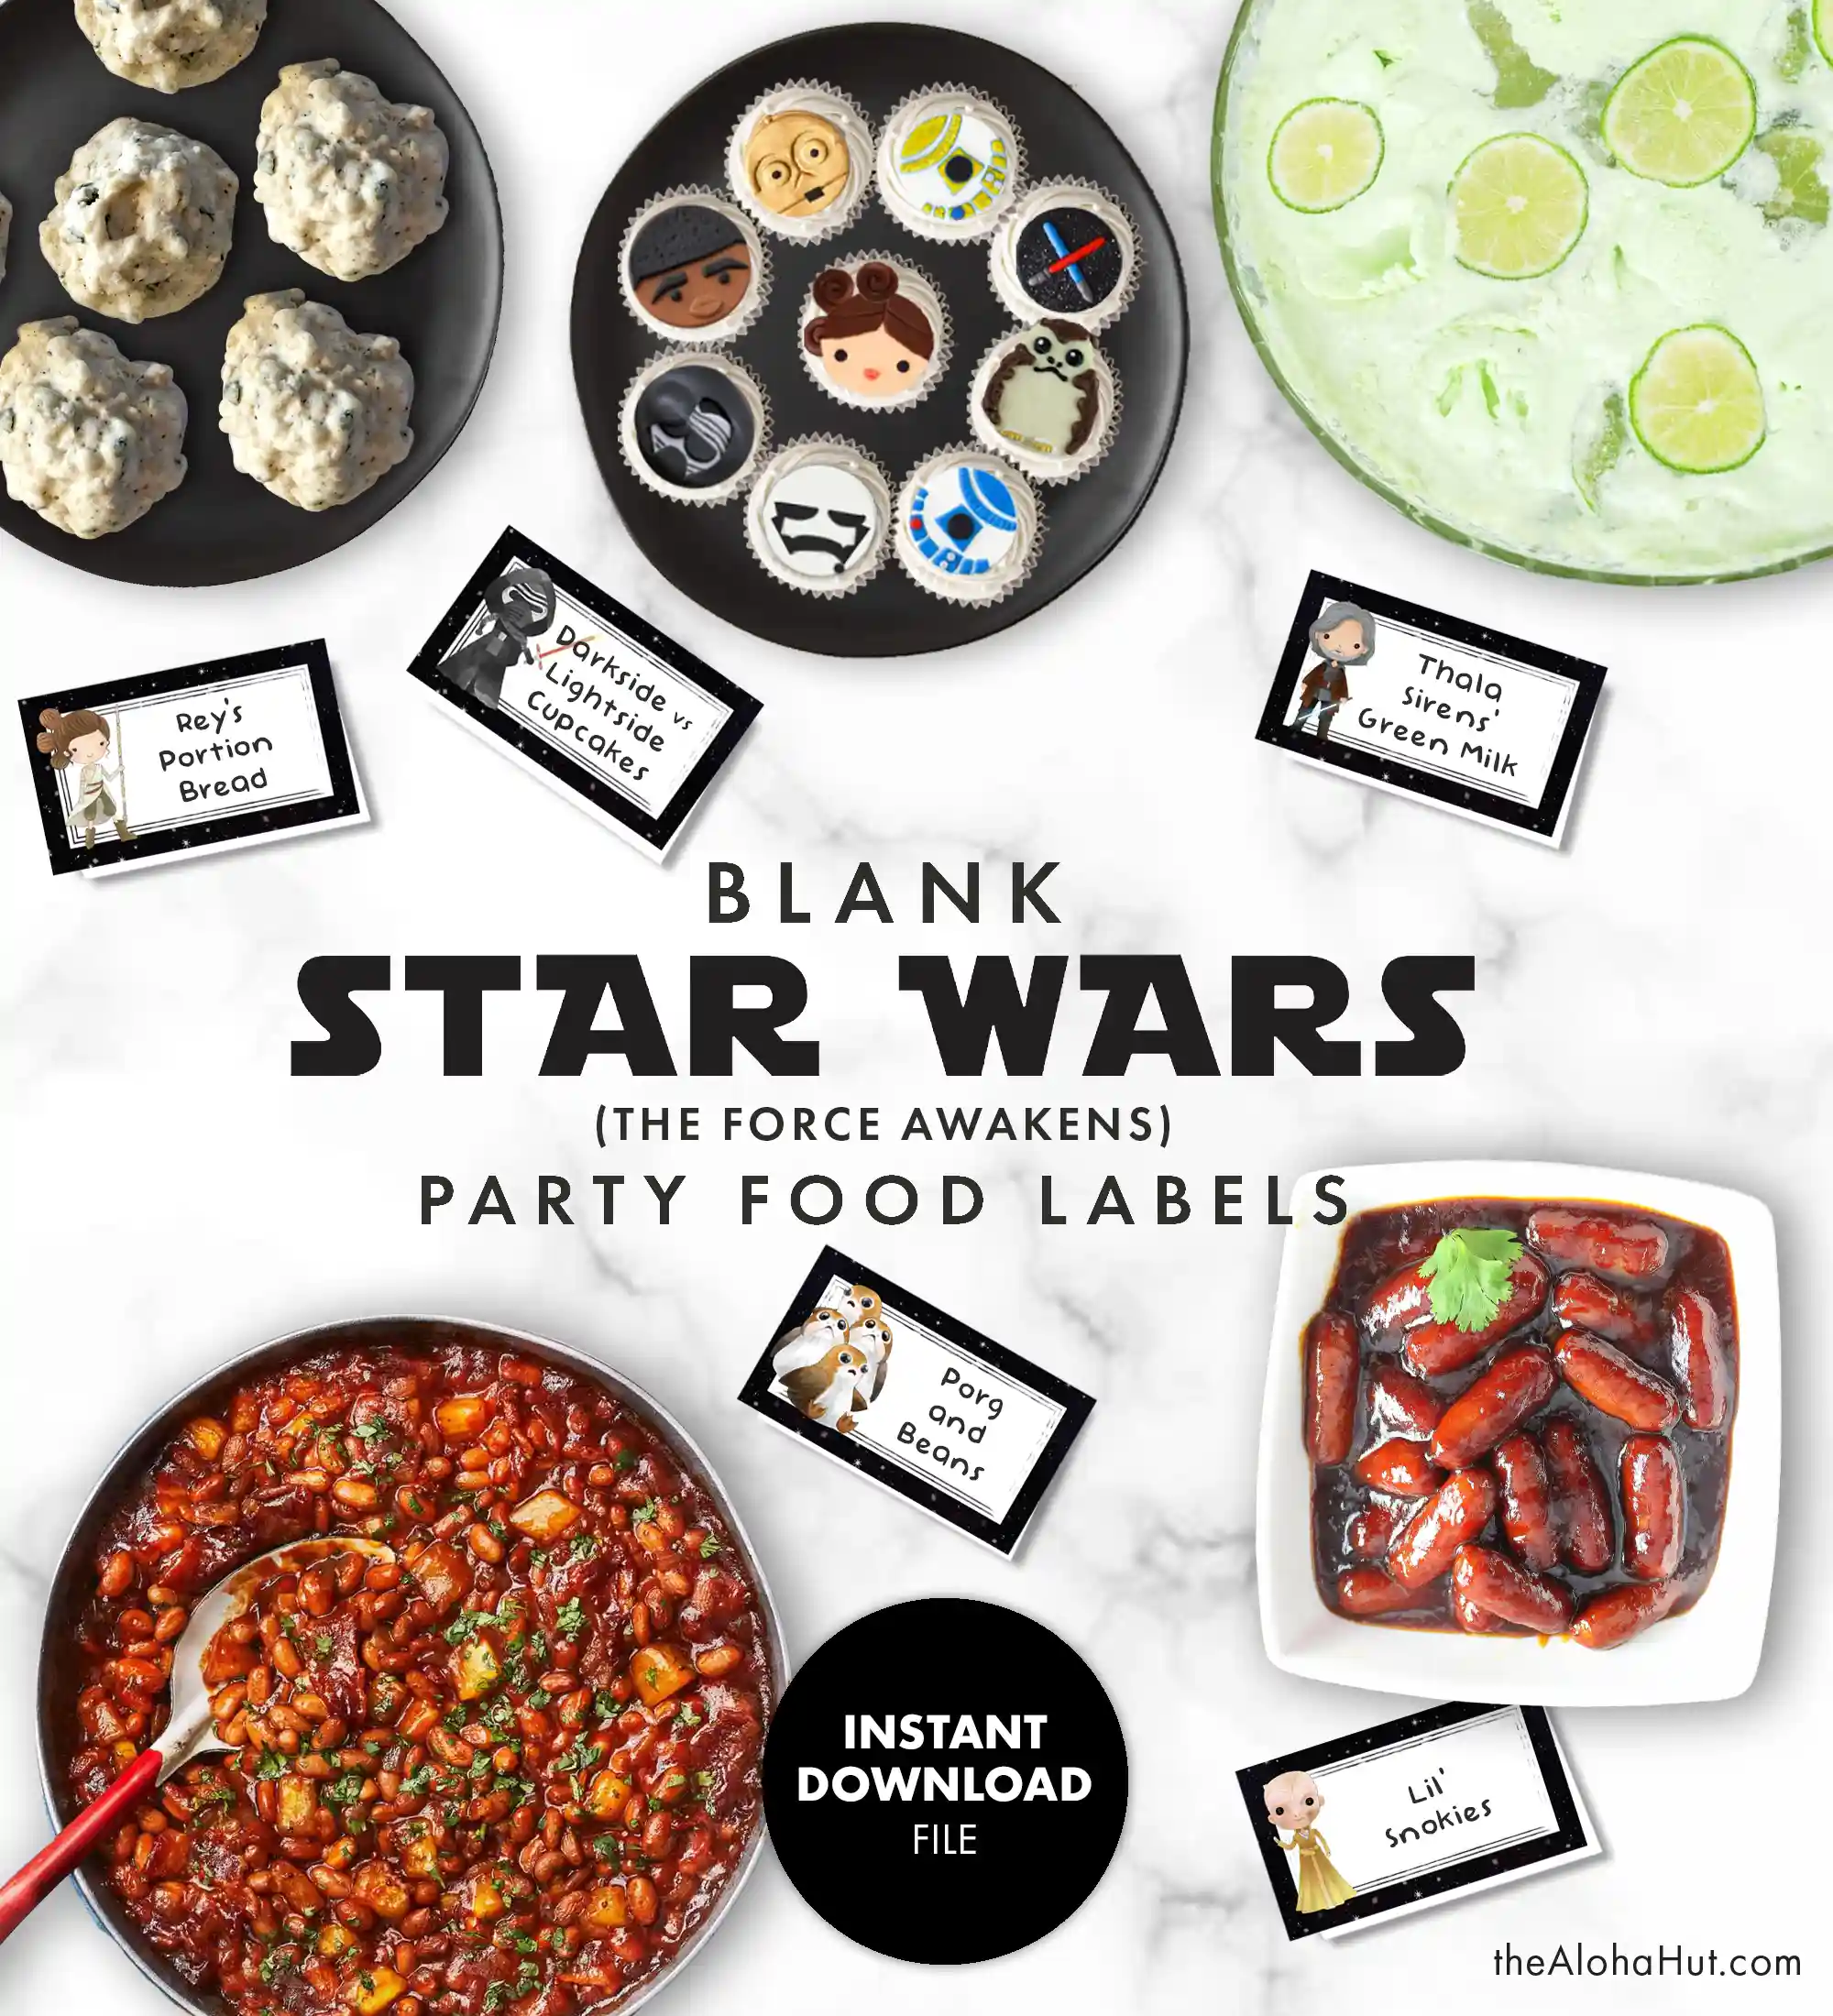 Star Wars party ideas, activities, birthday party games, decorations, and prints. Ideas and tips and tricks for throwing the best Star Wars themed kids birthday party, baby shower, or one with the force celebration. Includes Star Wars printable games, decorations (cupcake toppers, banners, gift tags, characters) and Star Wars party games (BINGO, scavenger hunt, pin the lightsaber on Yoda or Darth Vader). Food labels.